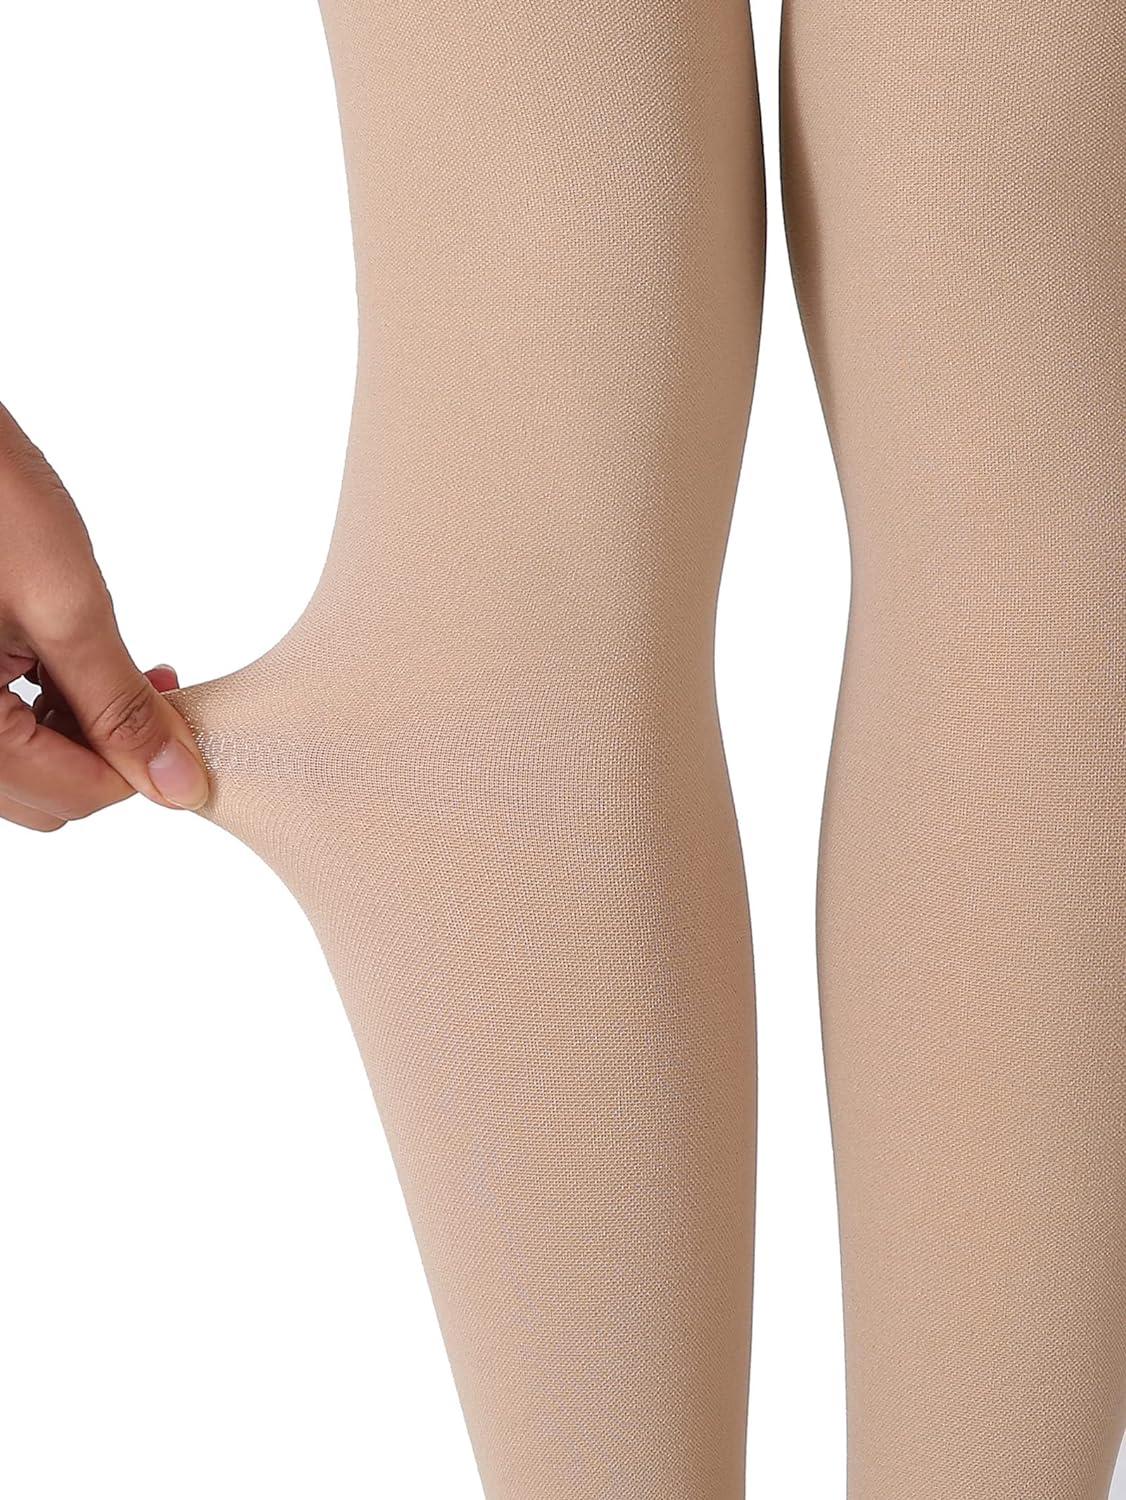 Thigh High Compression Stockings Closed Toe Pair Firm Support 20-30mmHg  Gradient Compression Socks with Silicone Band Unisex Opaque Best for Spider  & Varicose Veins Edema Swelling Beige XXL XX-Large Beige